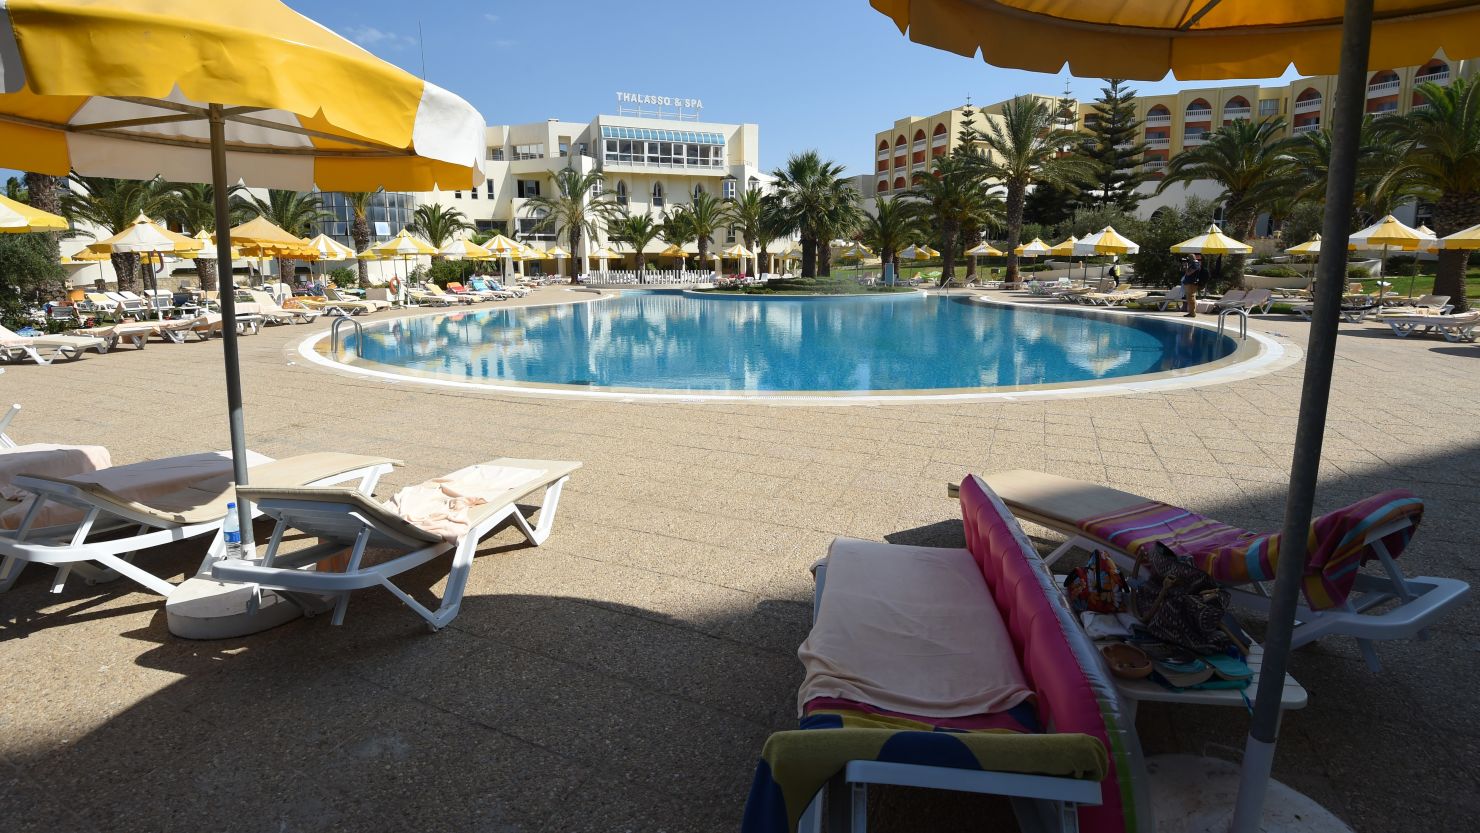 Thirty Britons died when a gunman attacked a beach and the Thalasso & Spa hotel in Sousse, Tunisia in June 2015. 